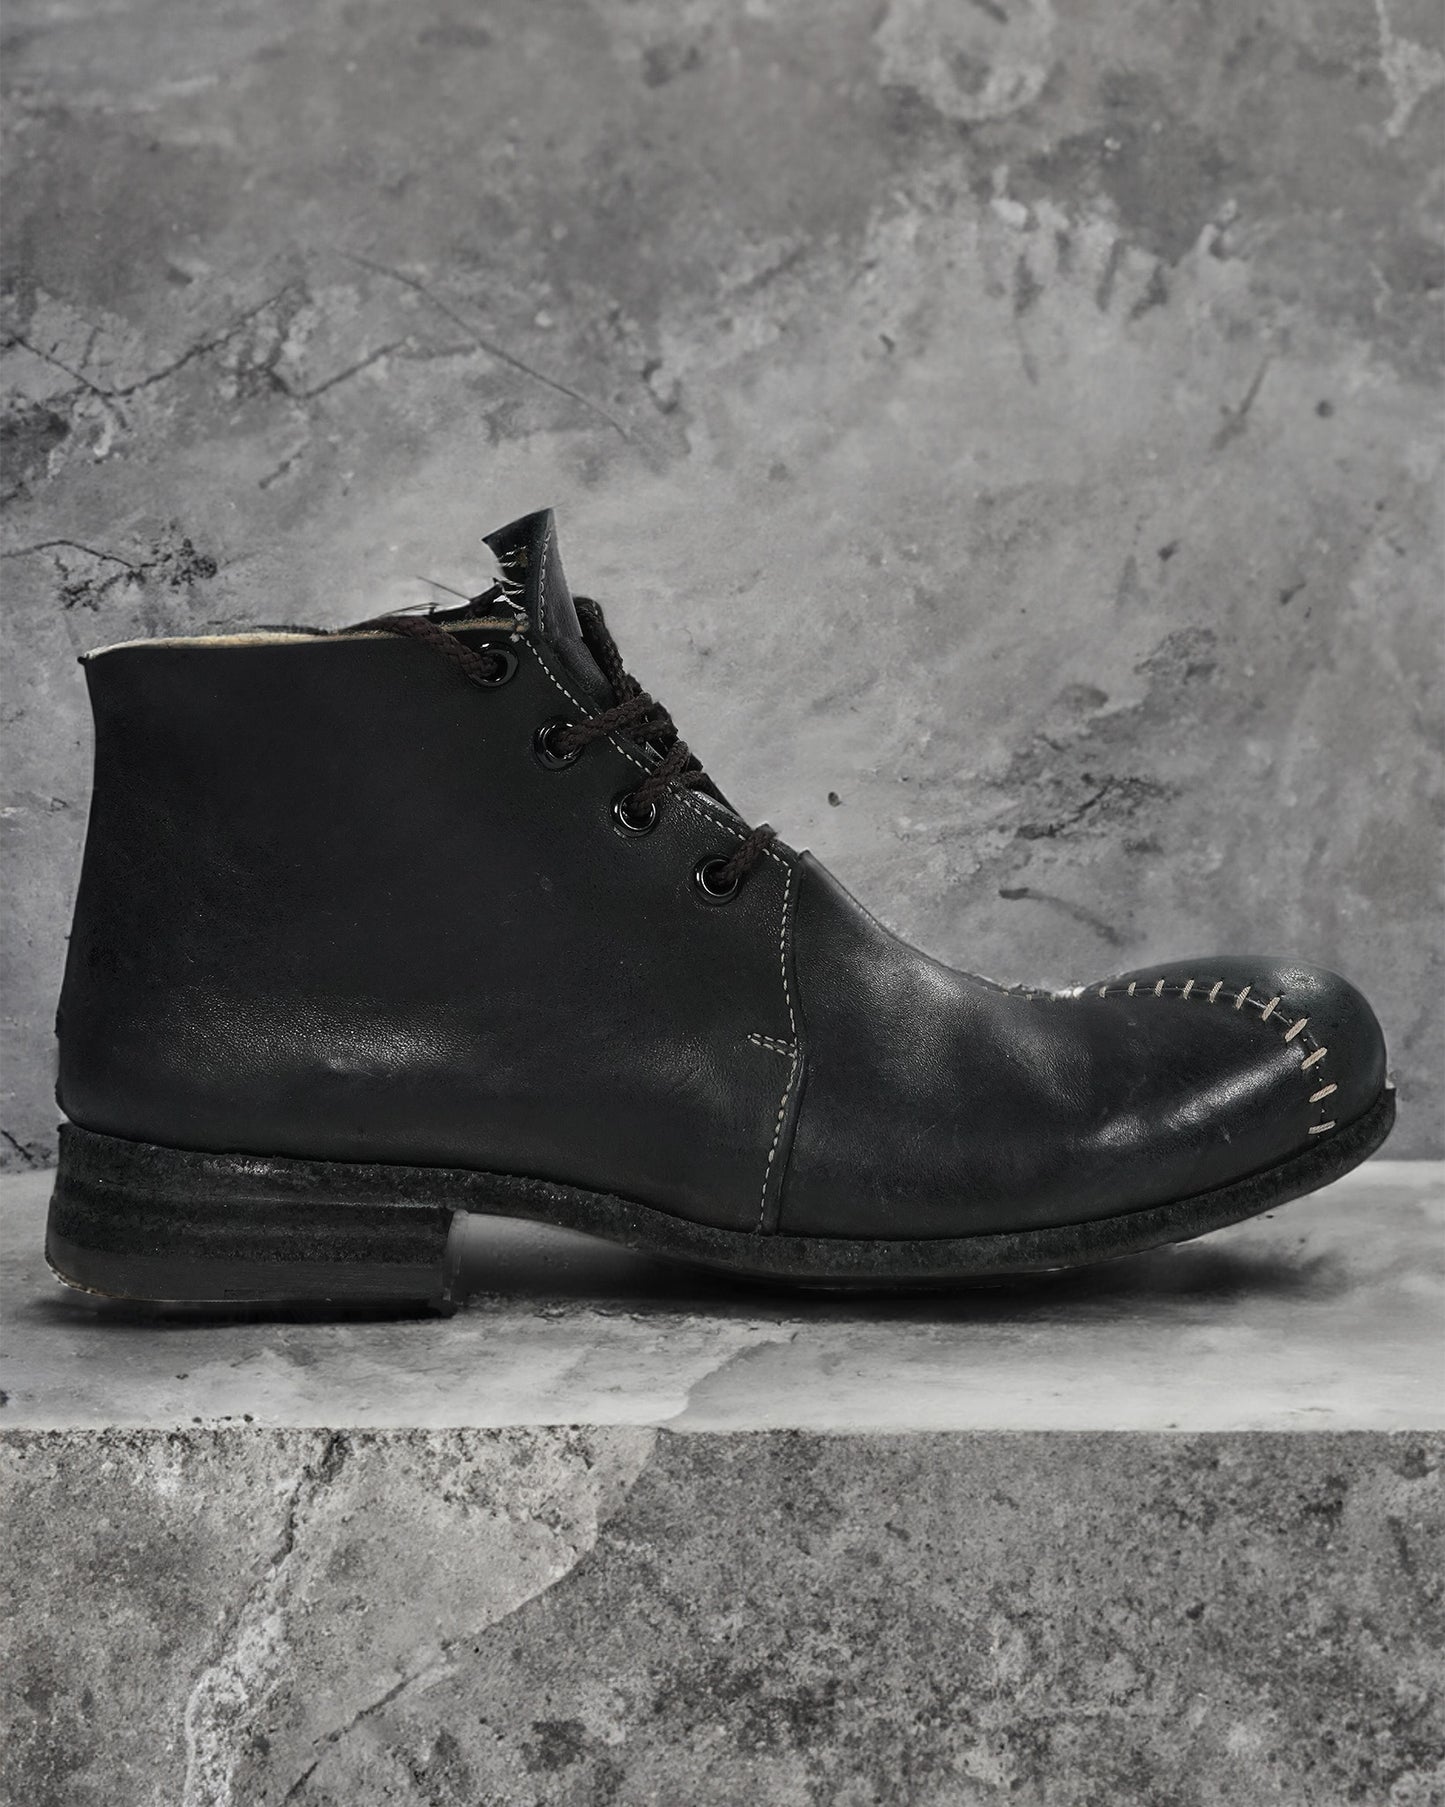 10sei0otto Artisanal Scarstitched Leather Boots